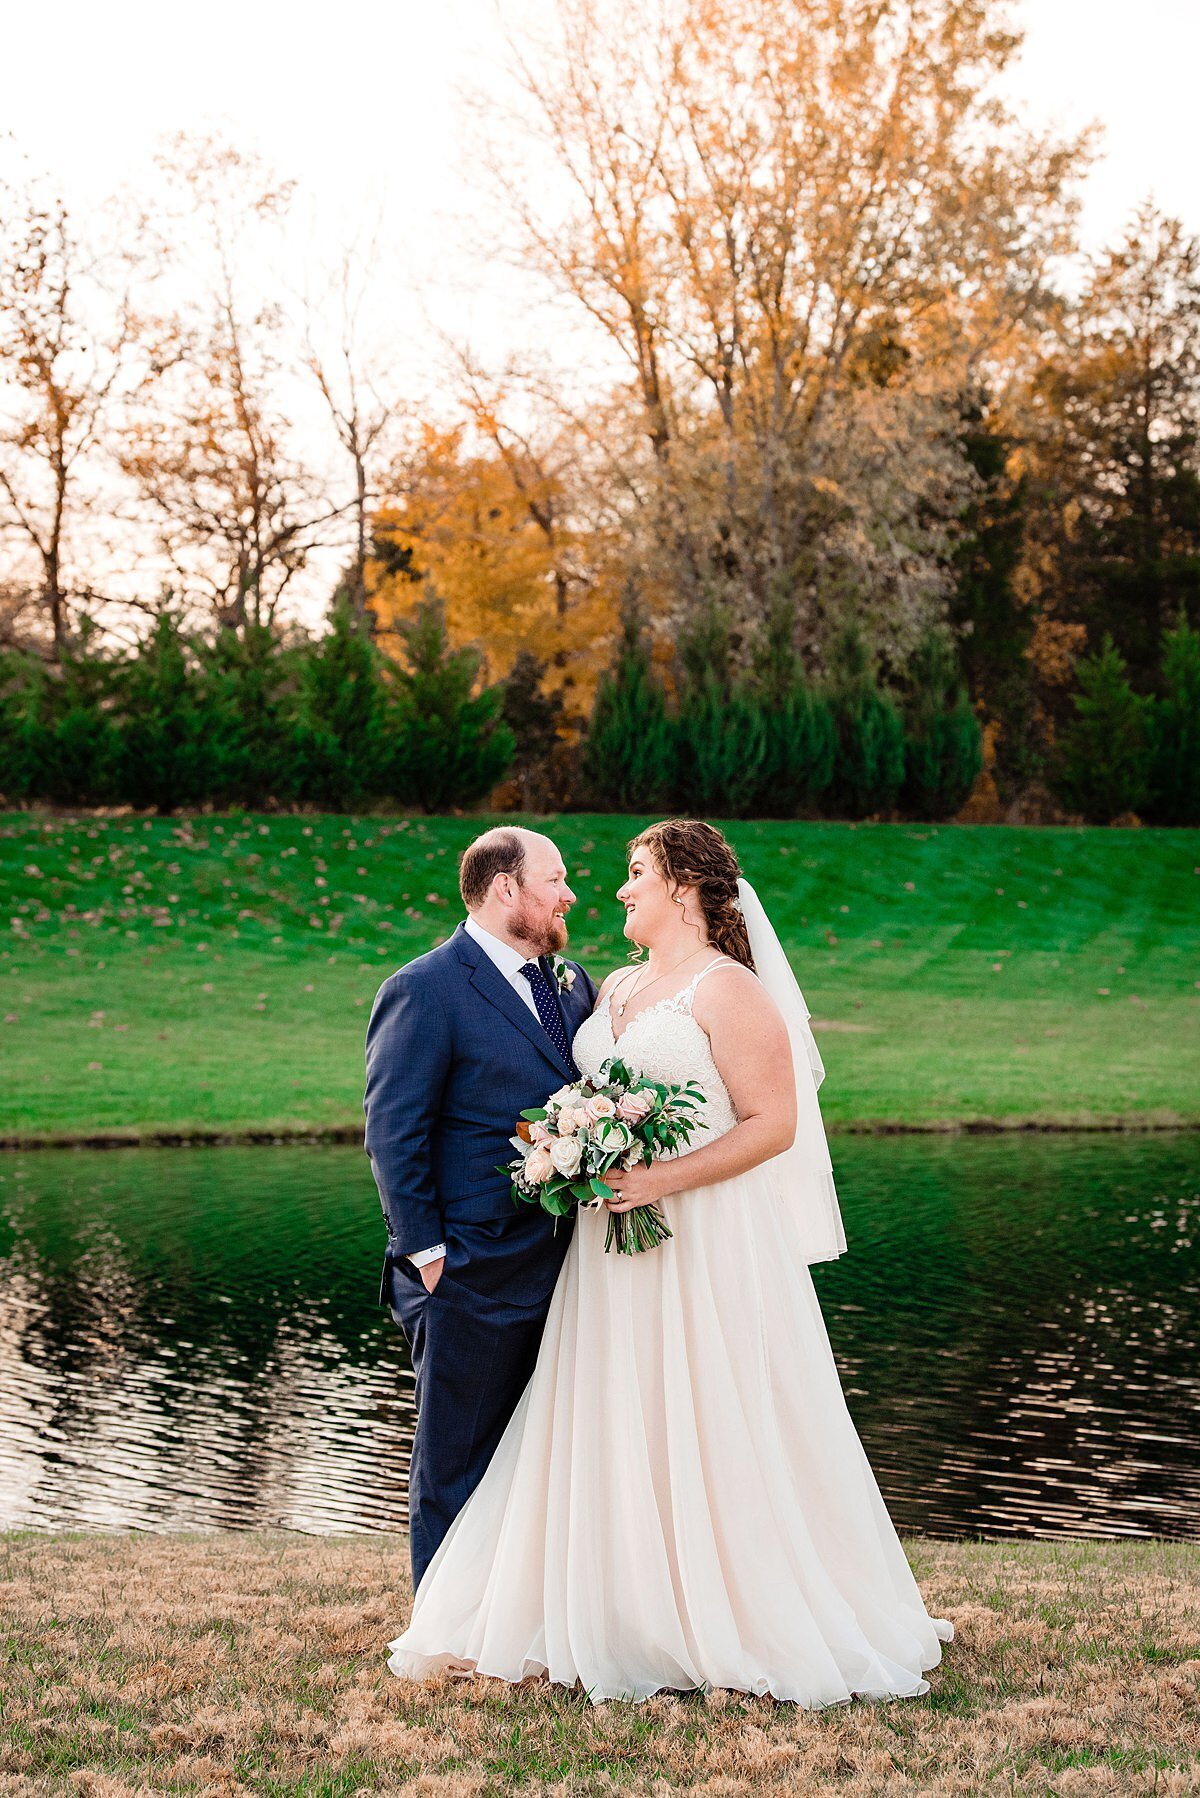 The bride wearing a lace v-neck a-line dress and long veil smiling back at her groom dressed in a navy blue suit and tie while holding a large round bouquet of ivory, white, blush, burgundy and soft gray flowers and greenery as they stand beside a lake at Sycamore Farms